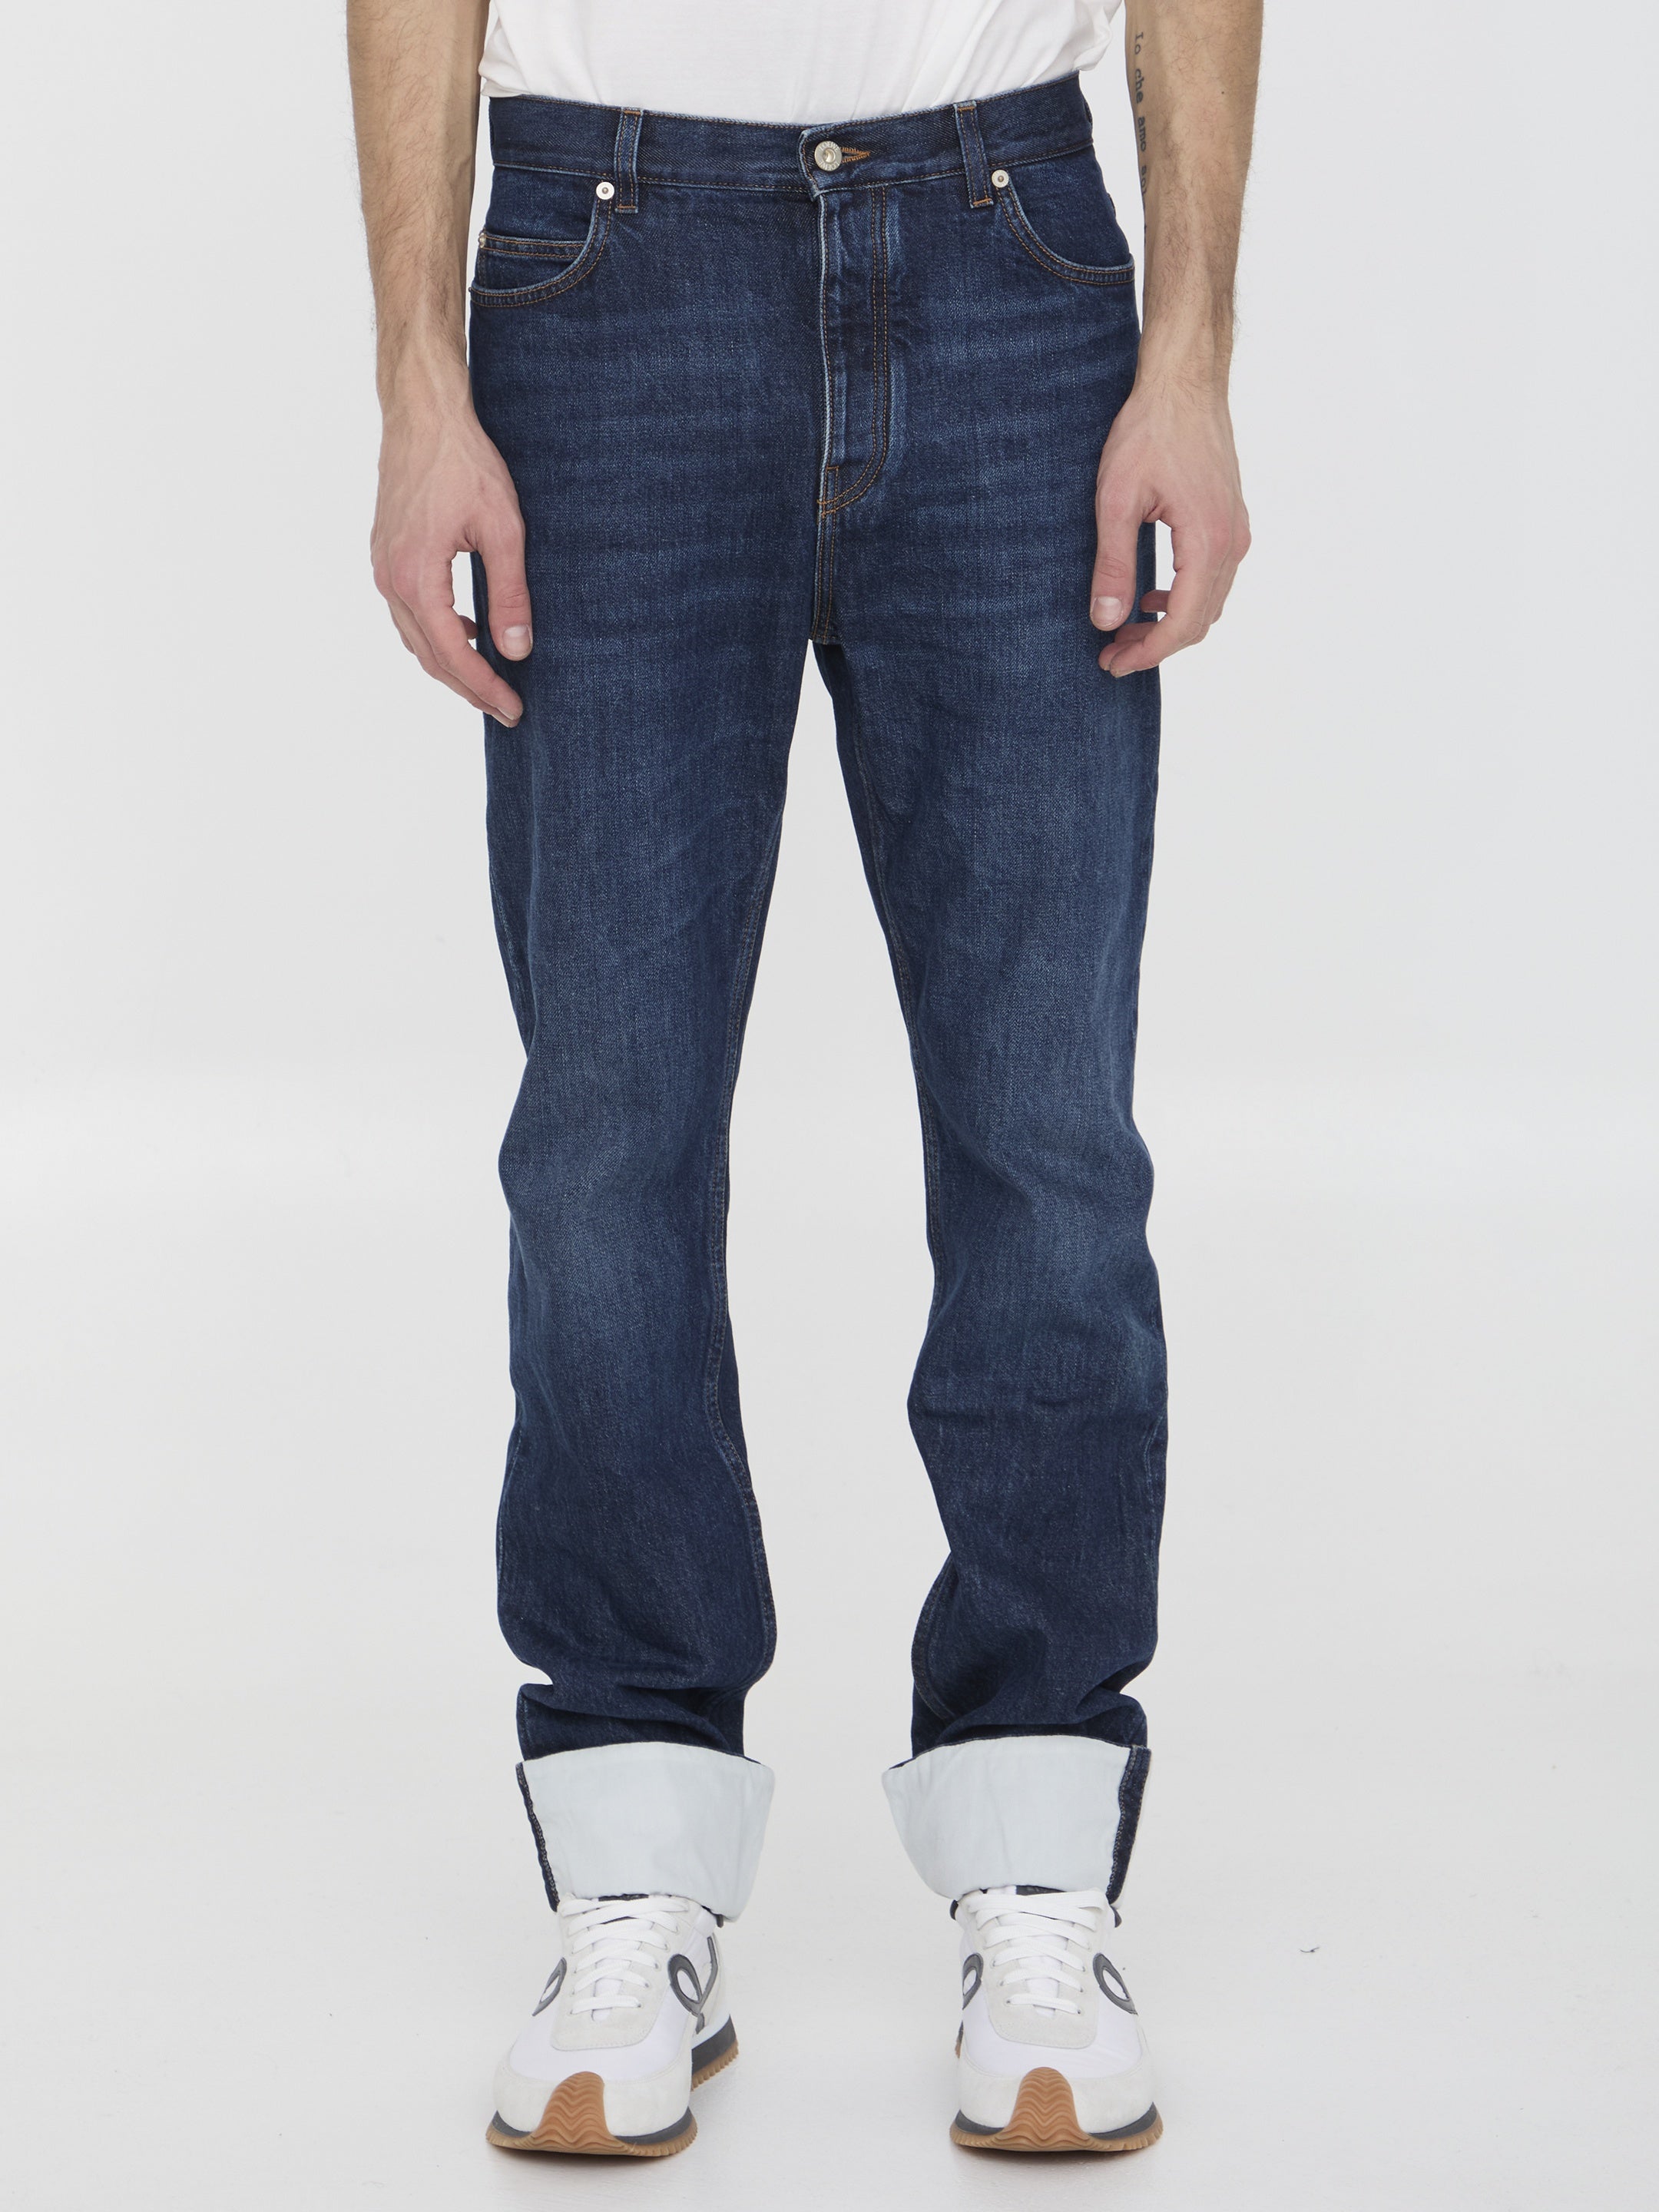 LOEWE-OUTLET-SALE-Fisherman-turn-up-jeans-Jeans-48-BLUE-ARCHIVE-COLLECTION.jpg